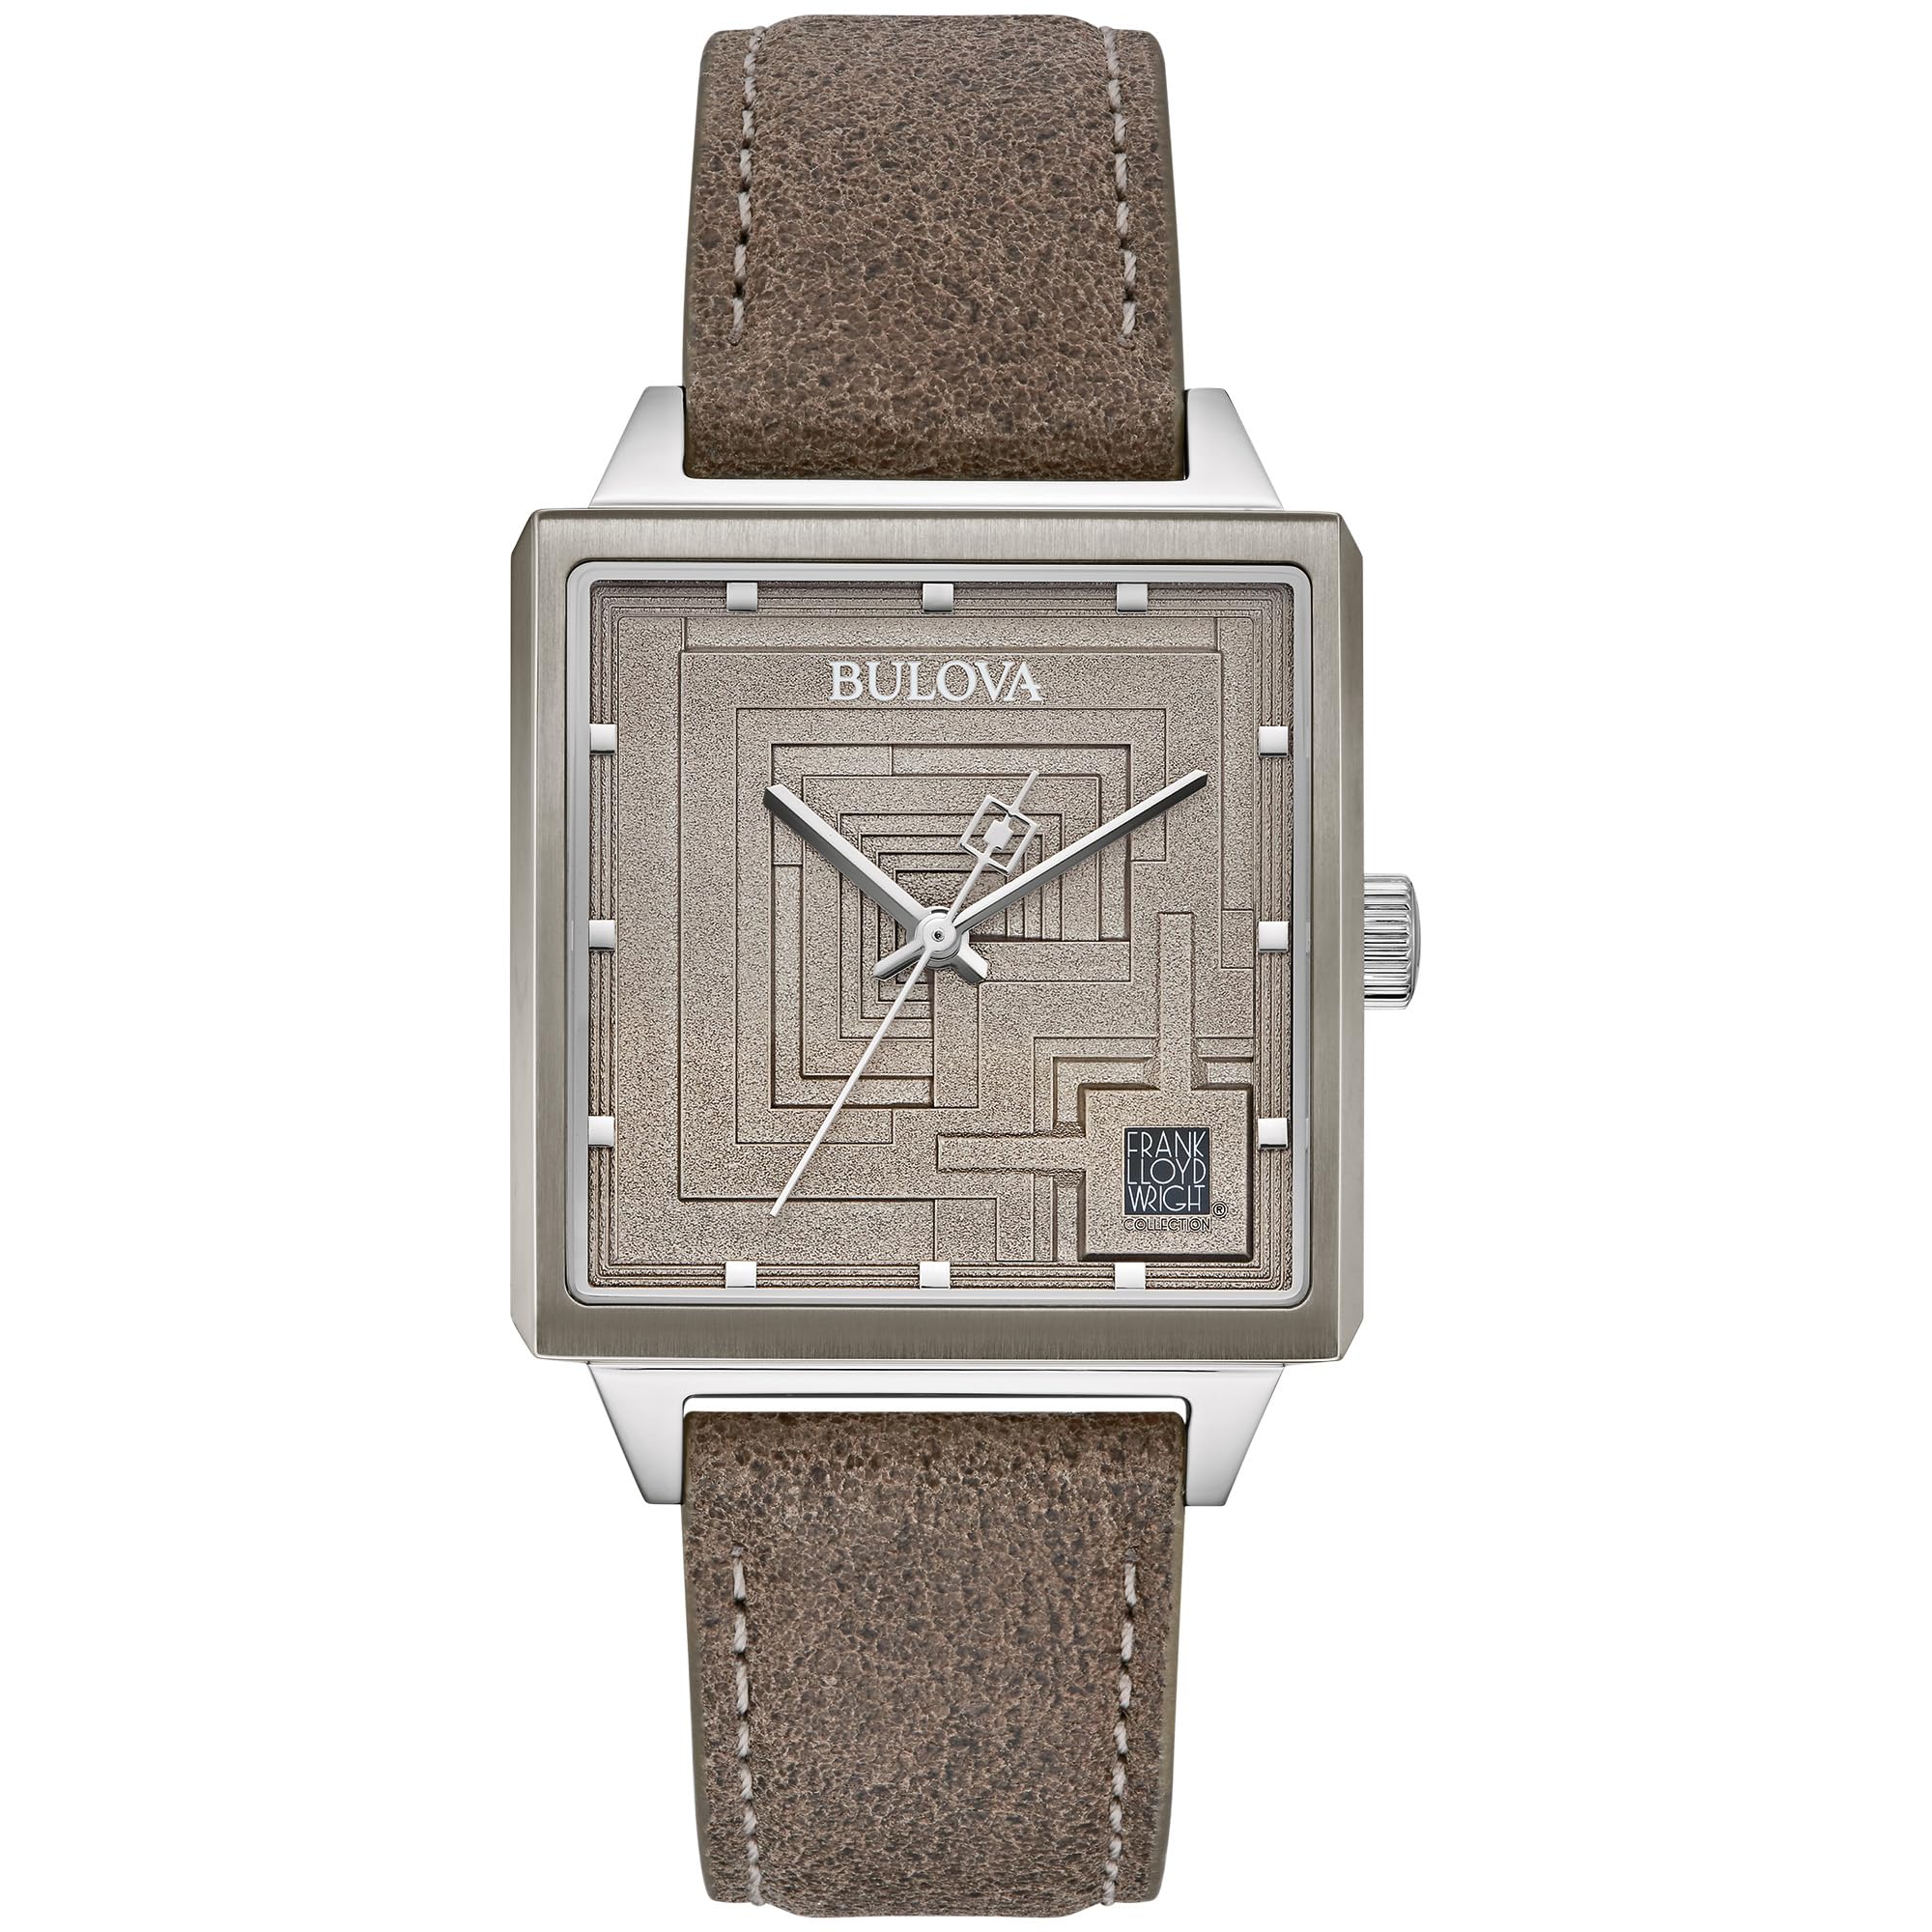 Bulova Men's Frank Lloyd Wright Limited Edition 'Ennis House' Silver Stainless Steel Watch, Grey Leather Strap Watch, Textured Medallion Grey Pattern Dial, 3 Hand (Model: 96A314)